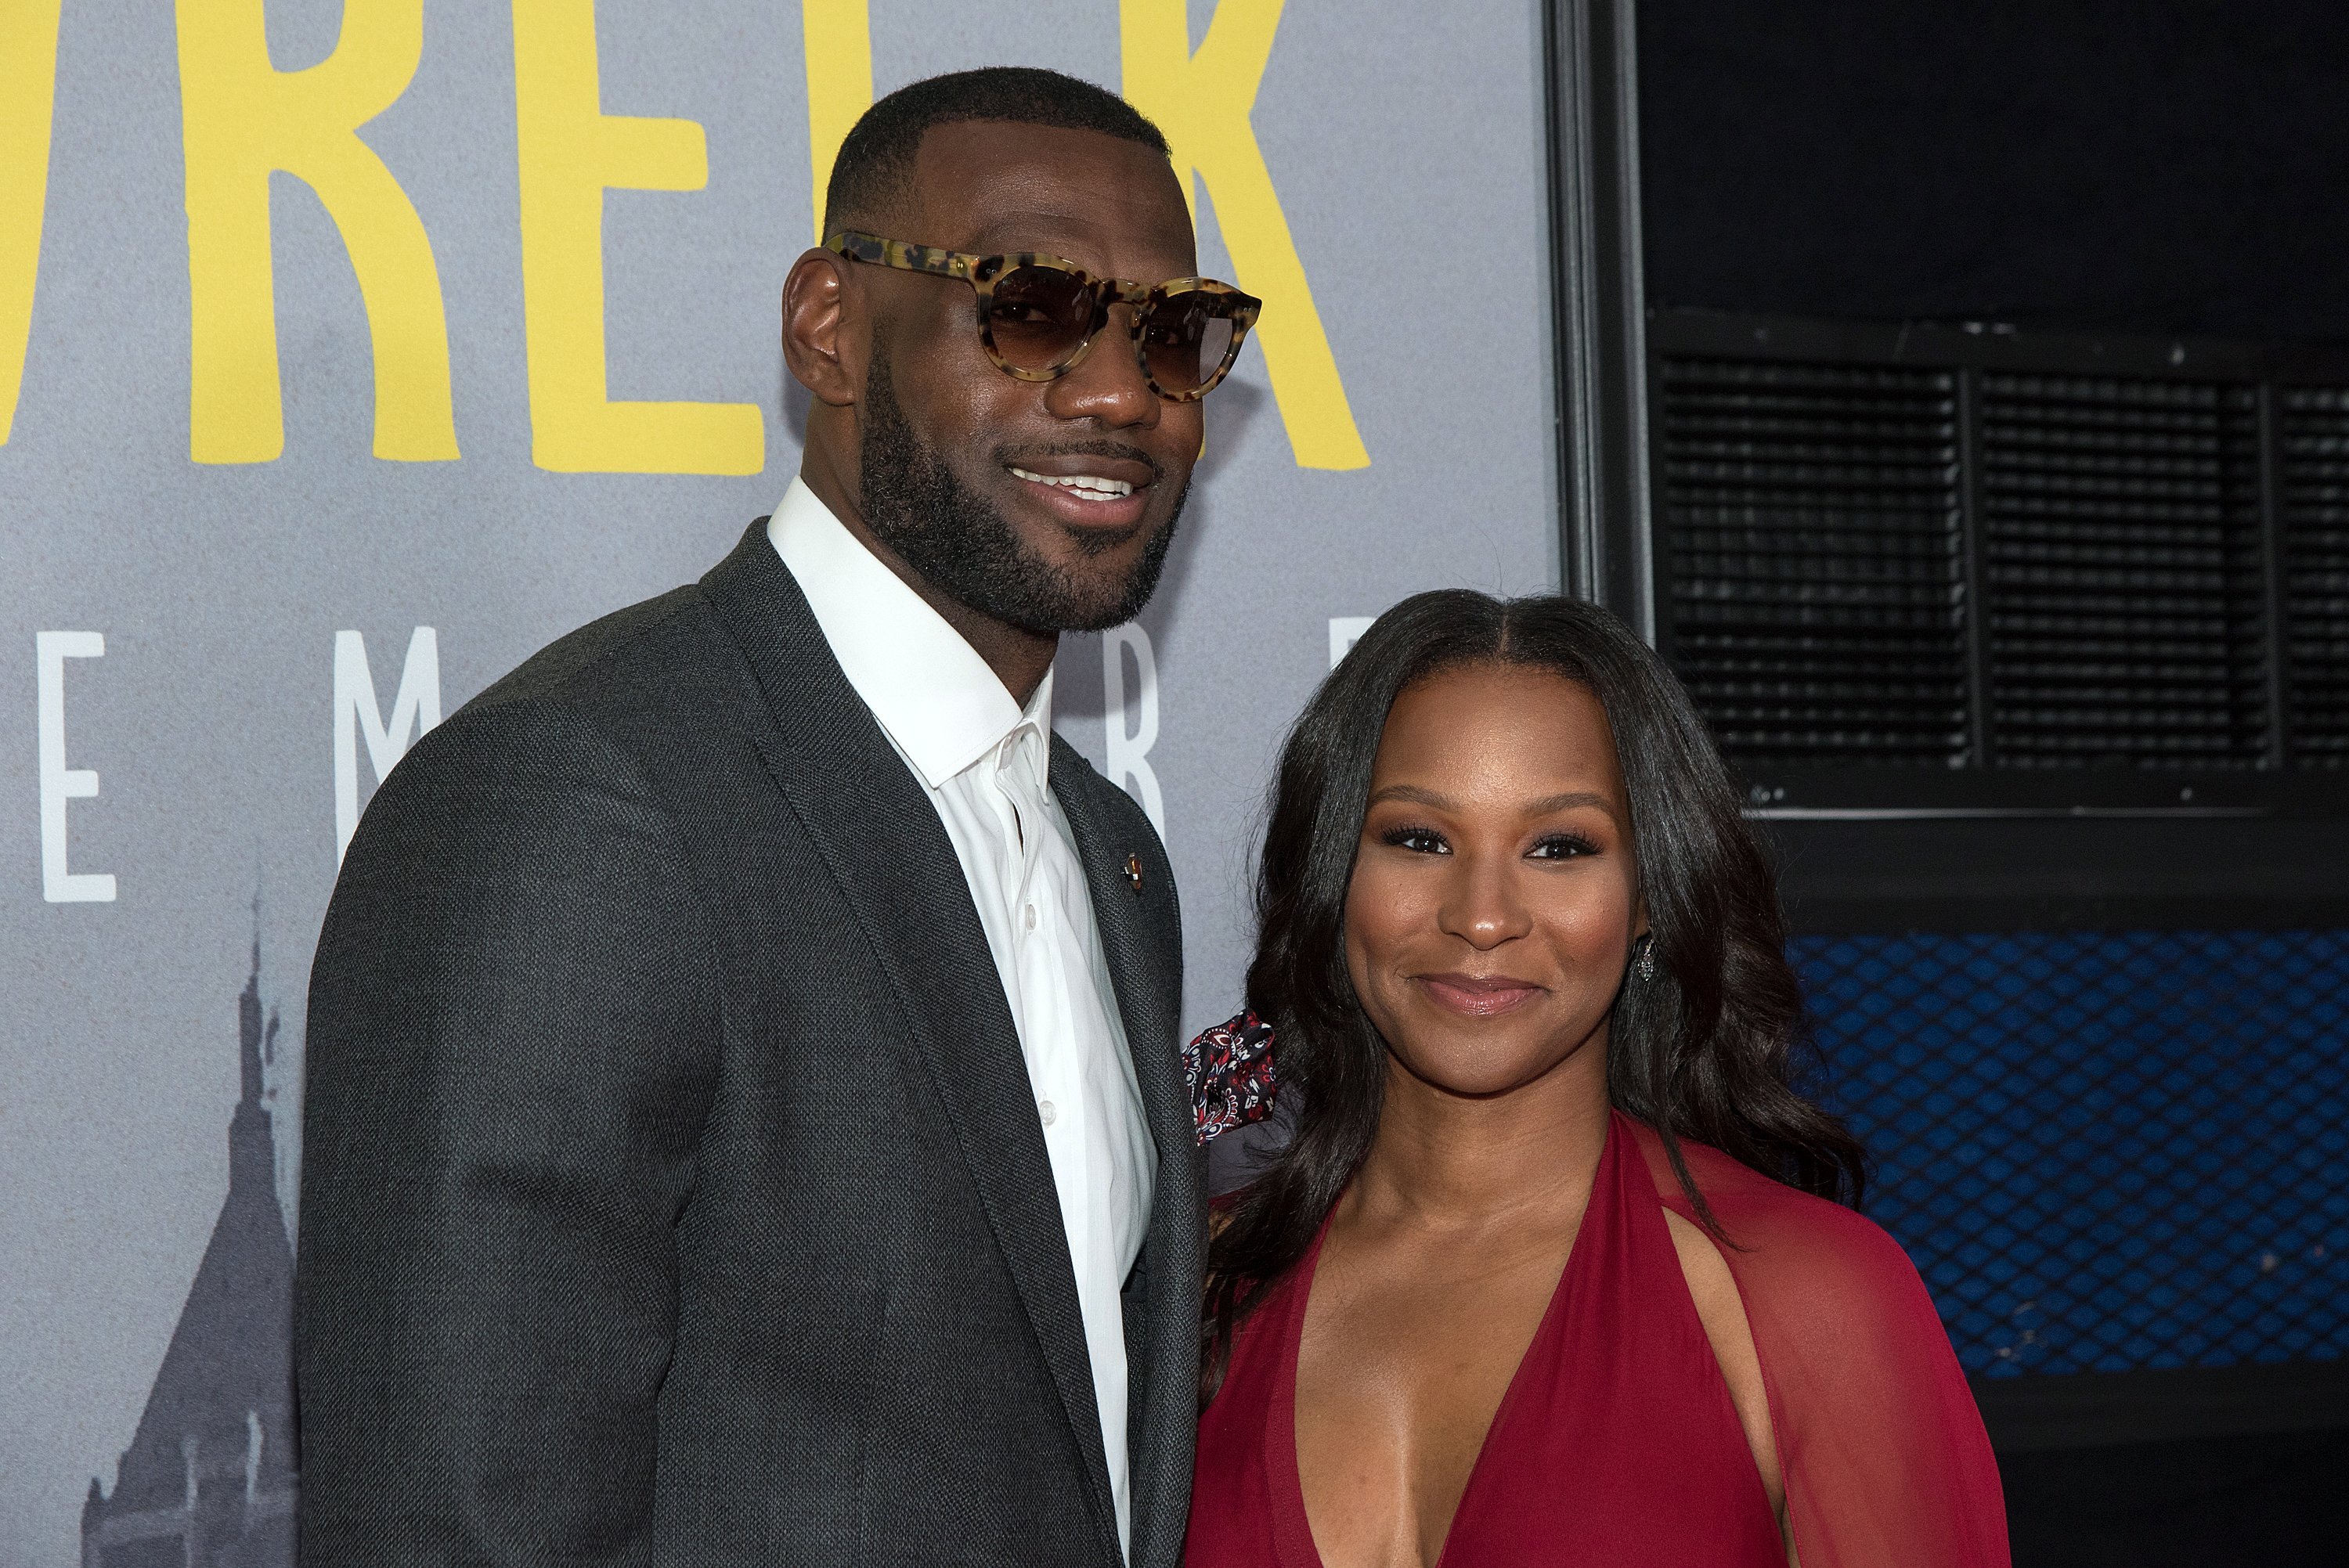 LeBron & Savannah James at the "Trainwreck" New York Premiere on July 14, 2015 in New York City | Photo: Getty Images